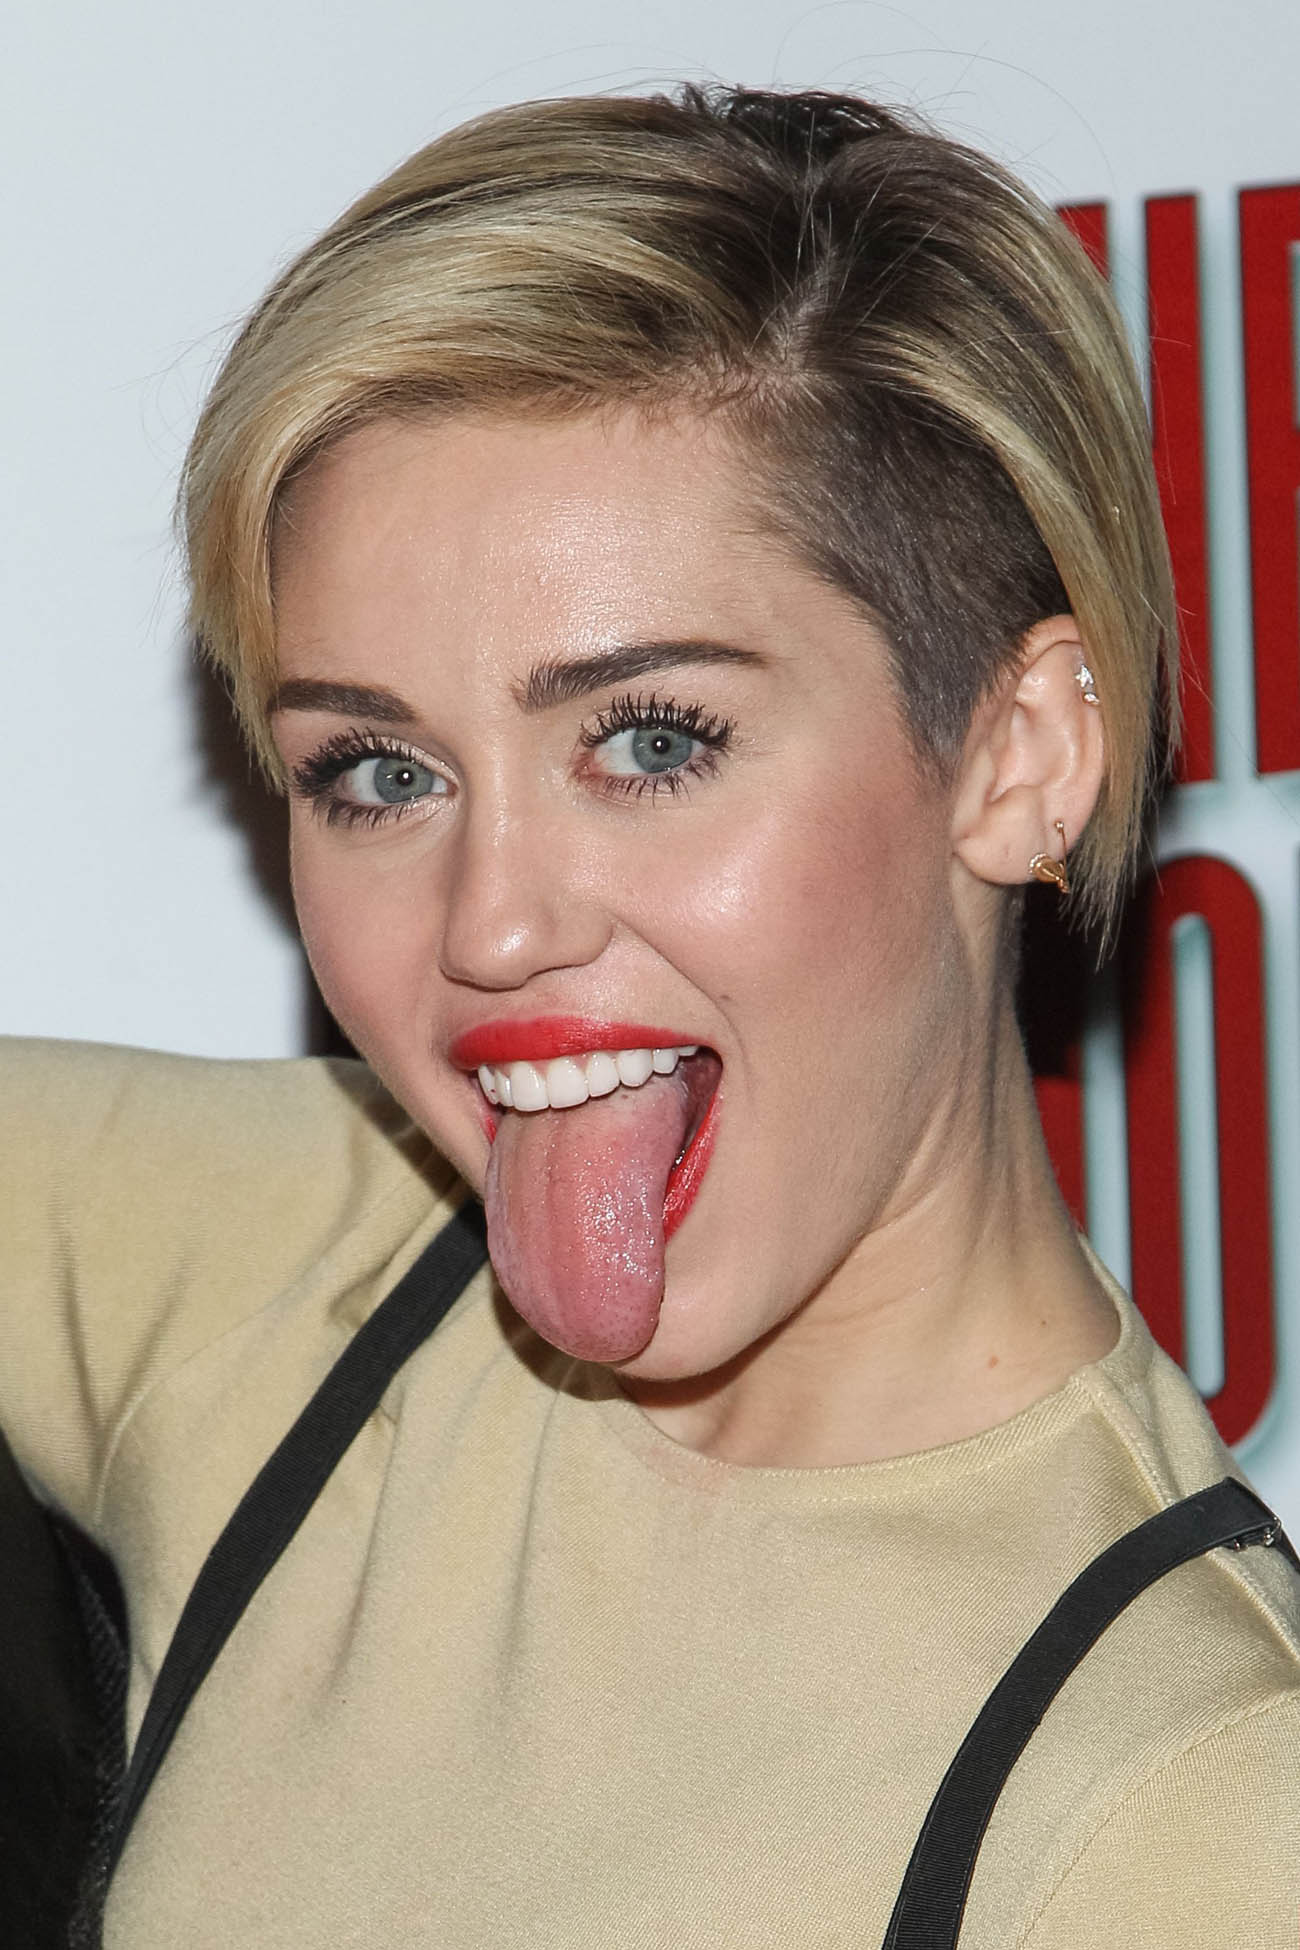 Will we be seeing Miley Cyrus's tongue once more in 2014? 